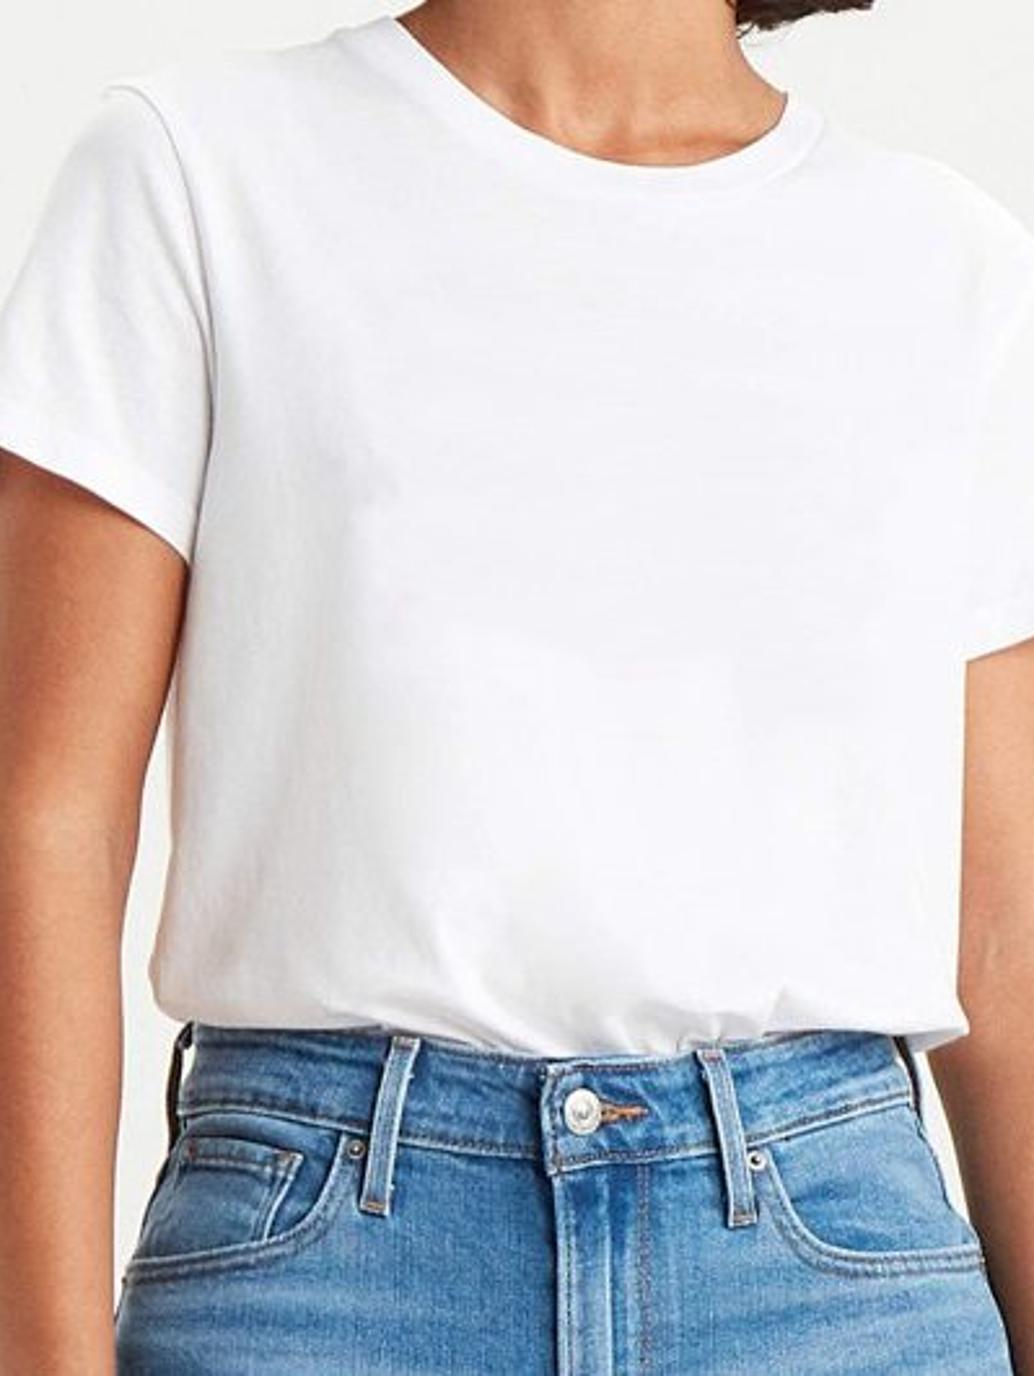 levis malaysia womens customize perfect t shirt 173690974 02 cropped